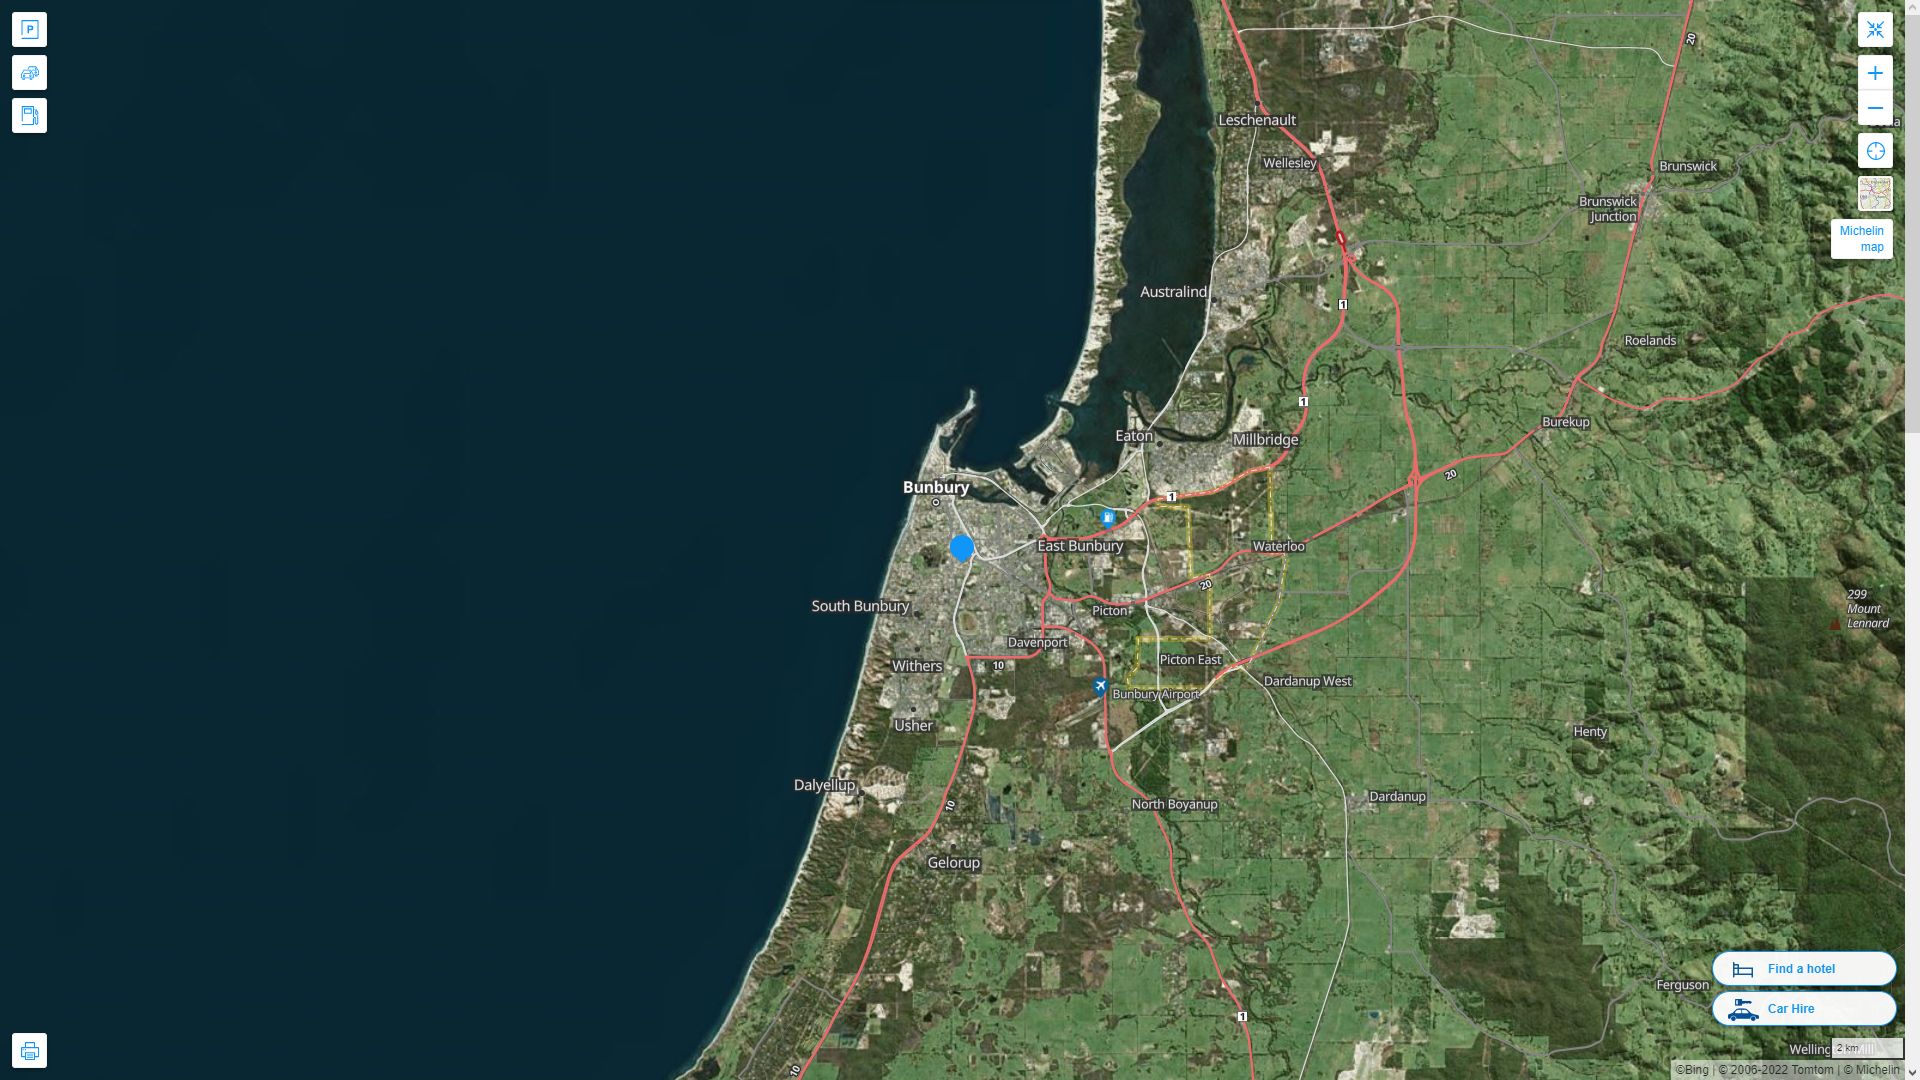 Bunbury Highway and Road Map with Satellite View